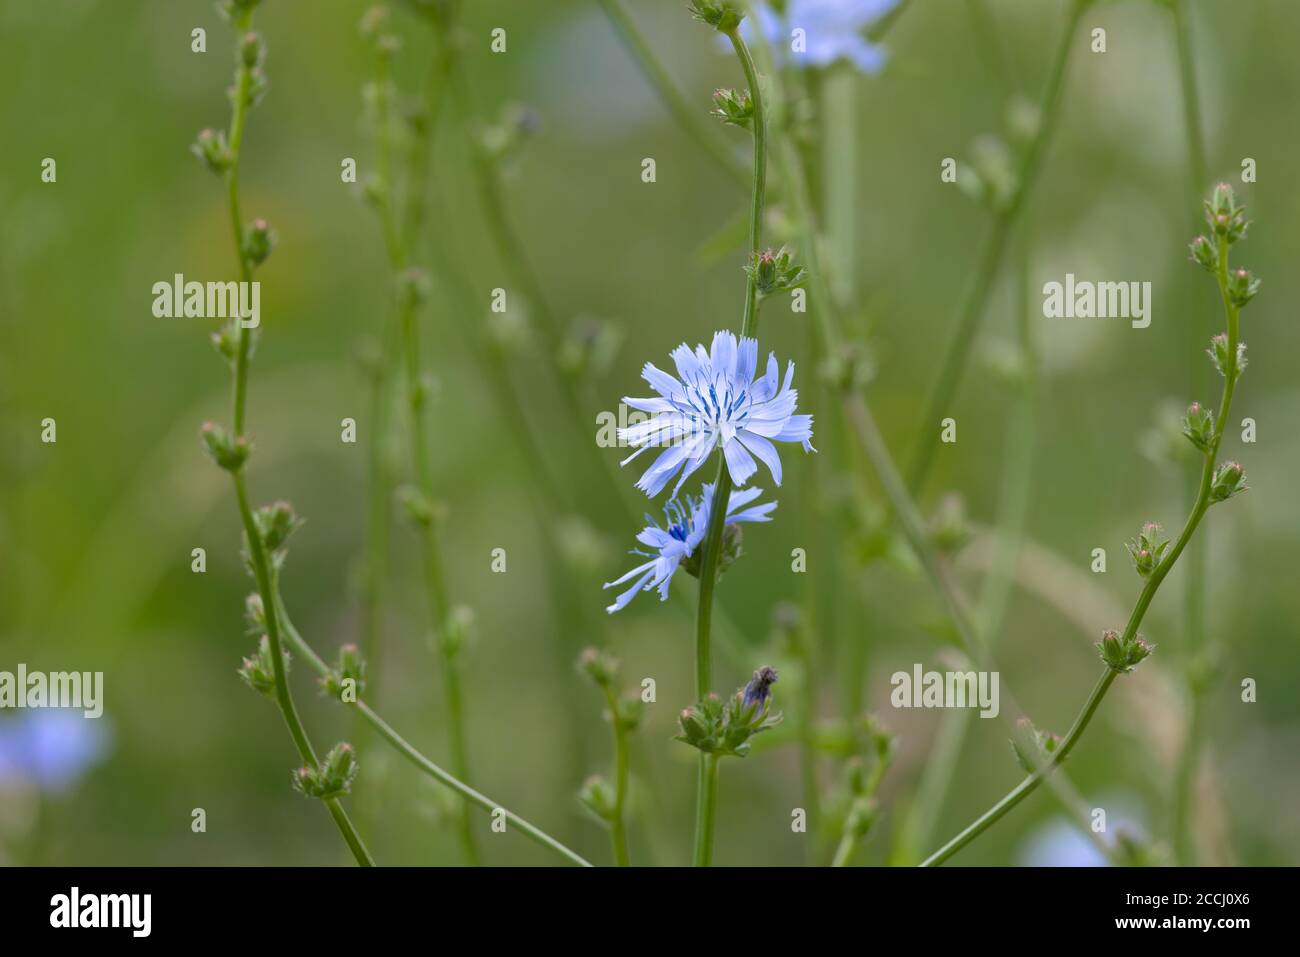 6 - Bright white and blue petals of a chicory plant flower. Plain green smooth background from selective focus technique. Wild meadow texture. Stock Photo